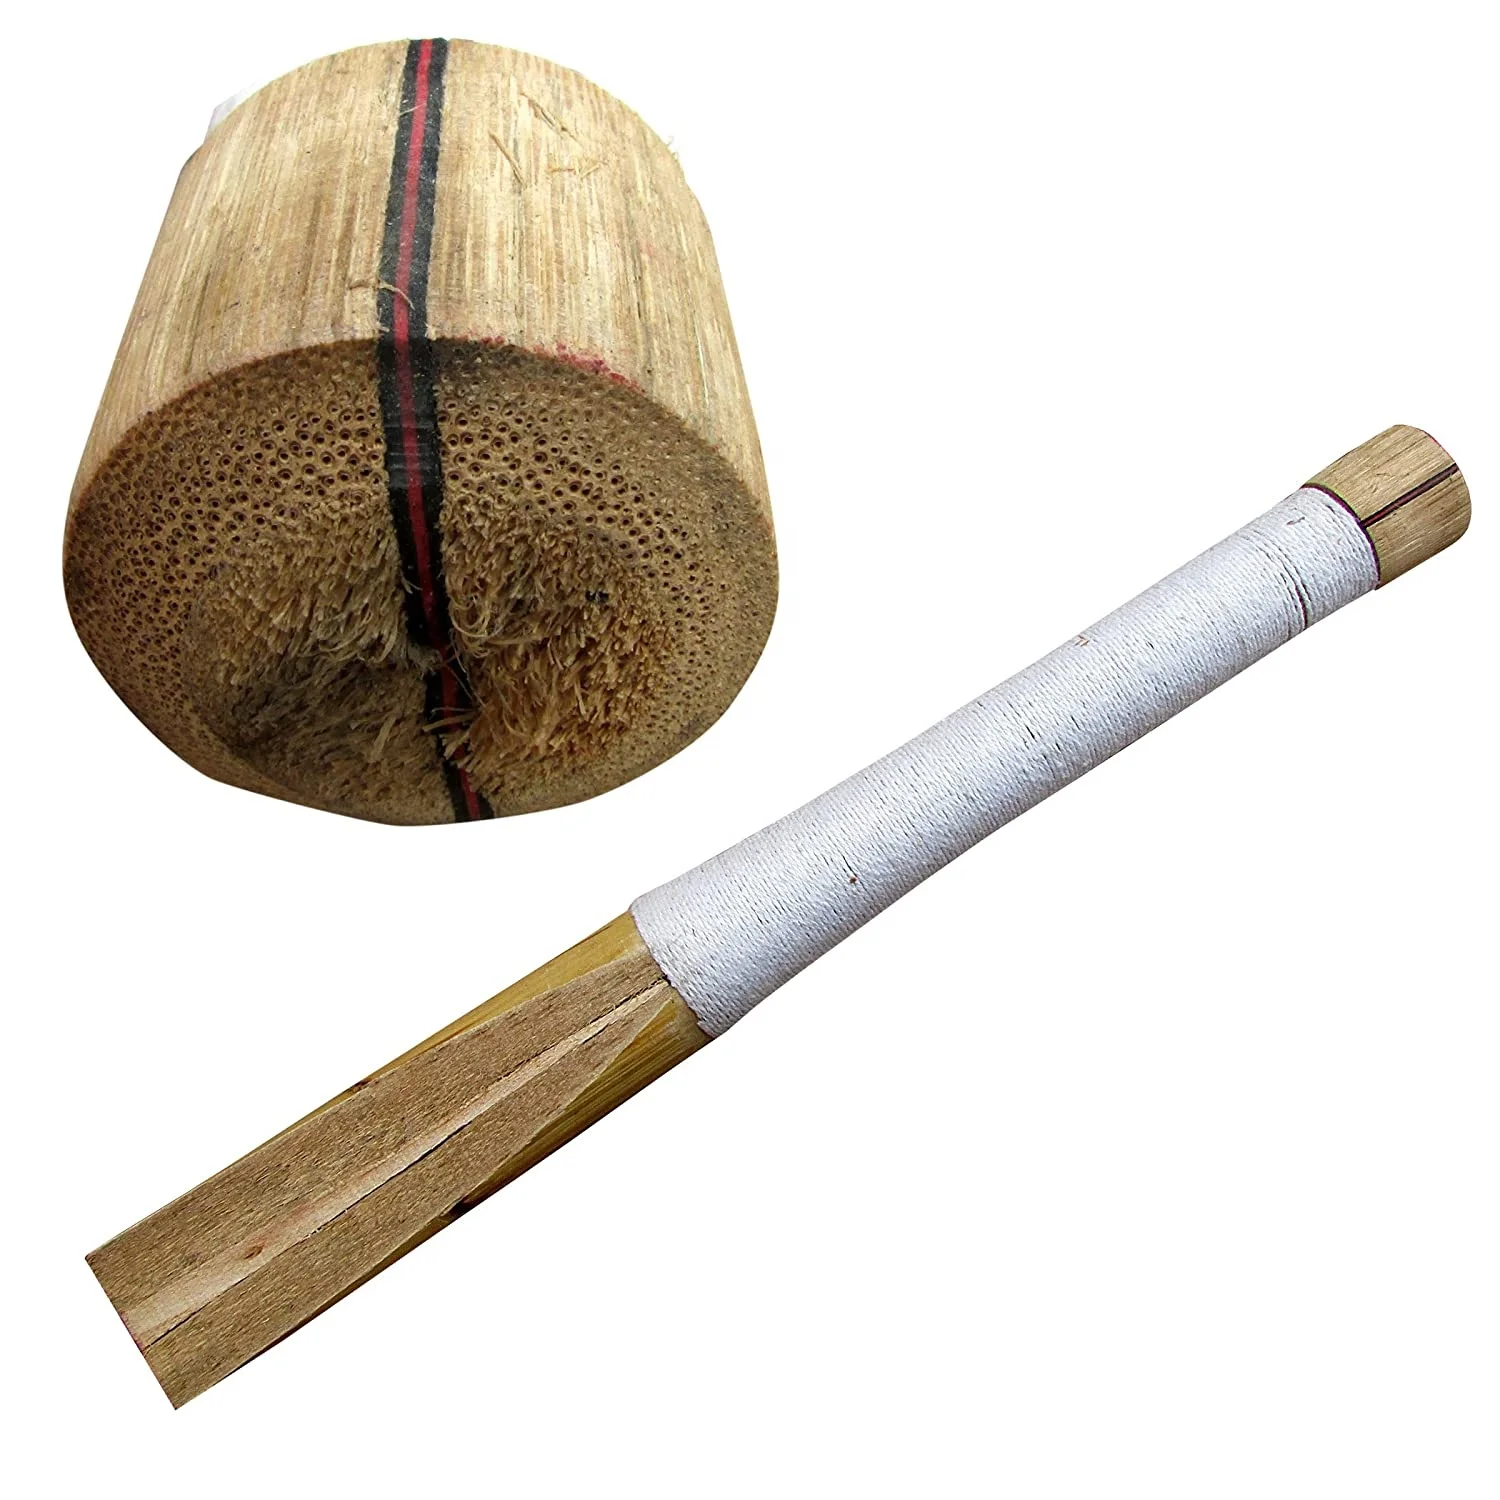 Source Hot Cheap High Quality Wood Cricket Bat Cane handle Player Edition Top Quality Wooden Cricket batting rubber Layers Handles on m.alibaba